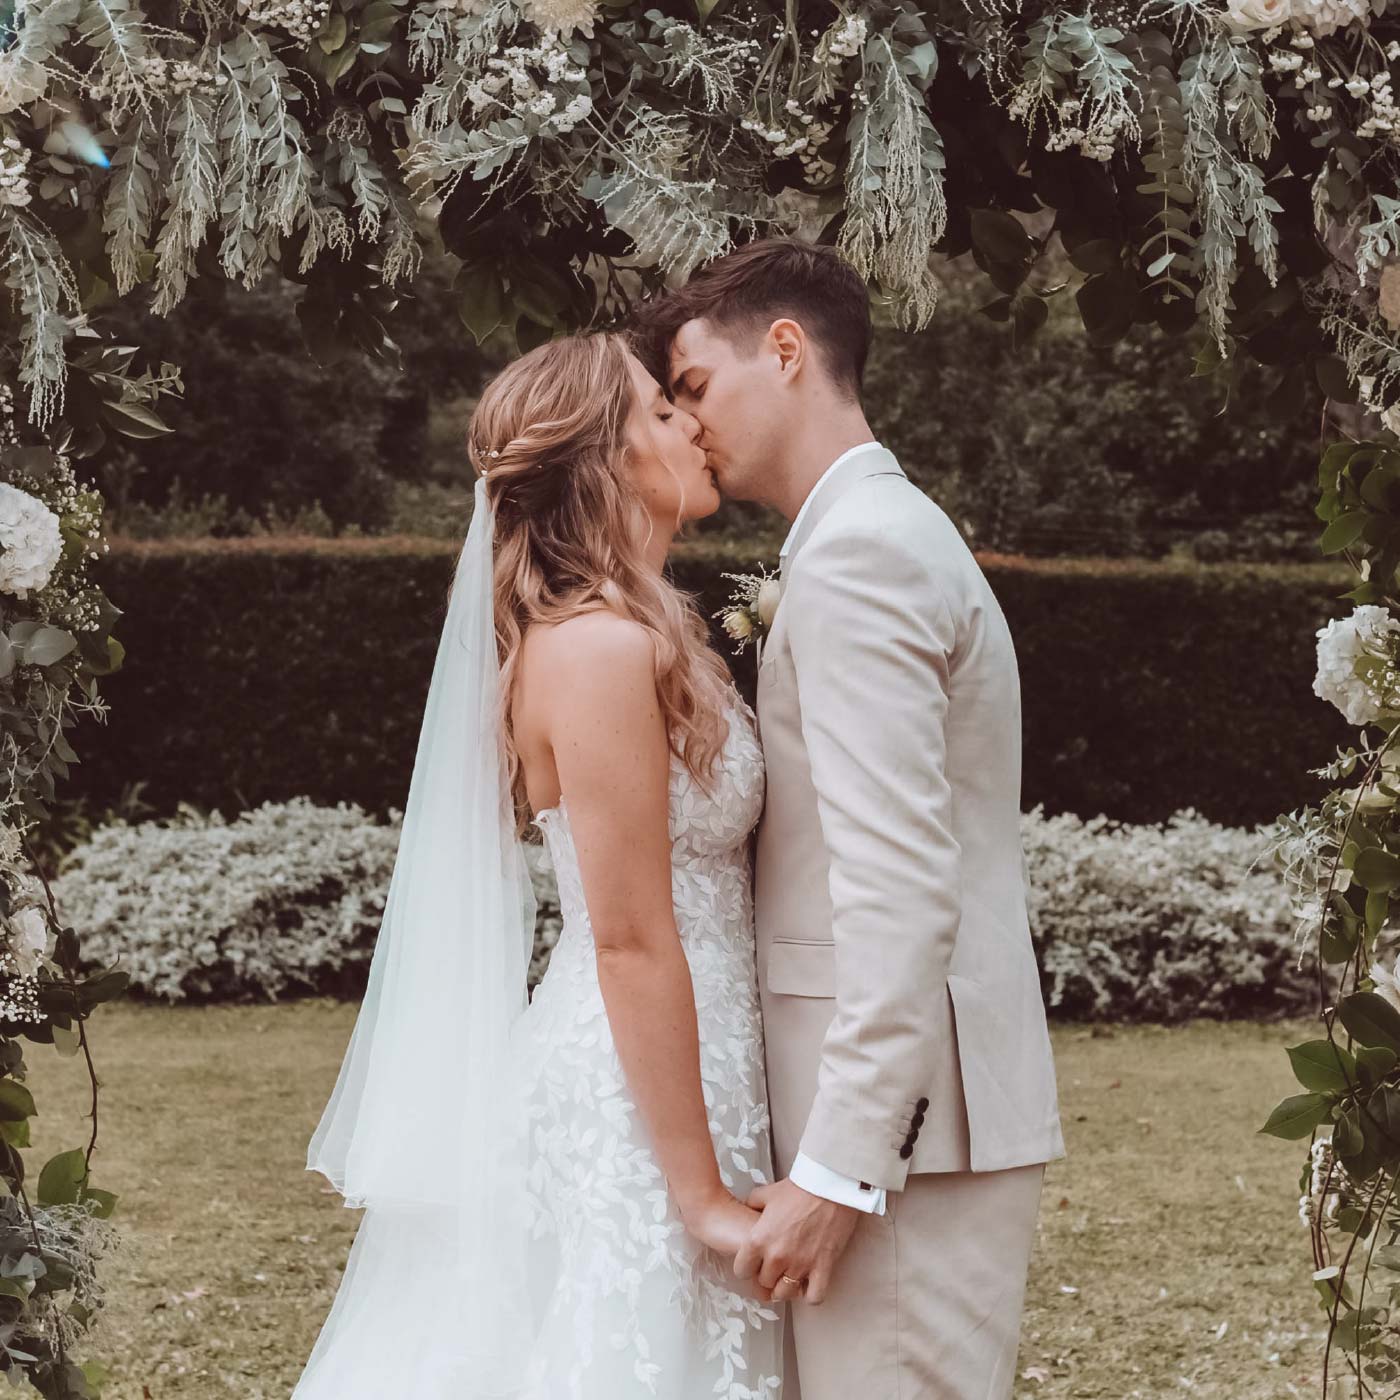 Bride and groom sharing a kiss under a floral arch in a garden setting. High-Quality Flower Arrangements. Fabulous Flowers and Gifts. Weddings.